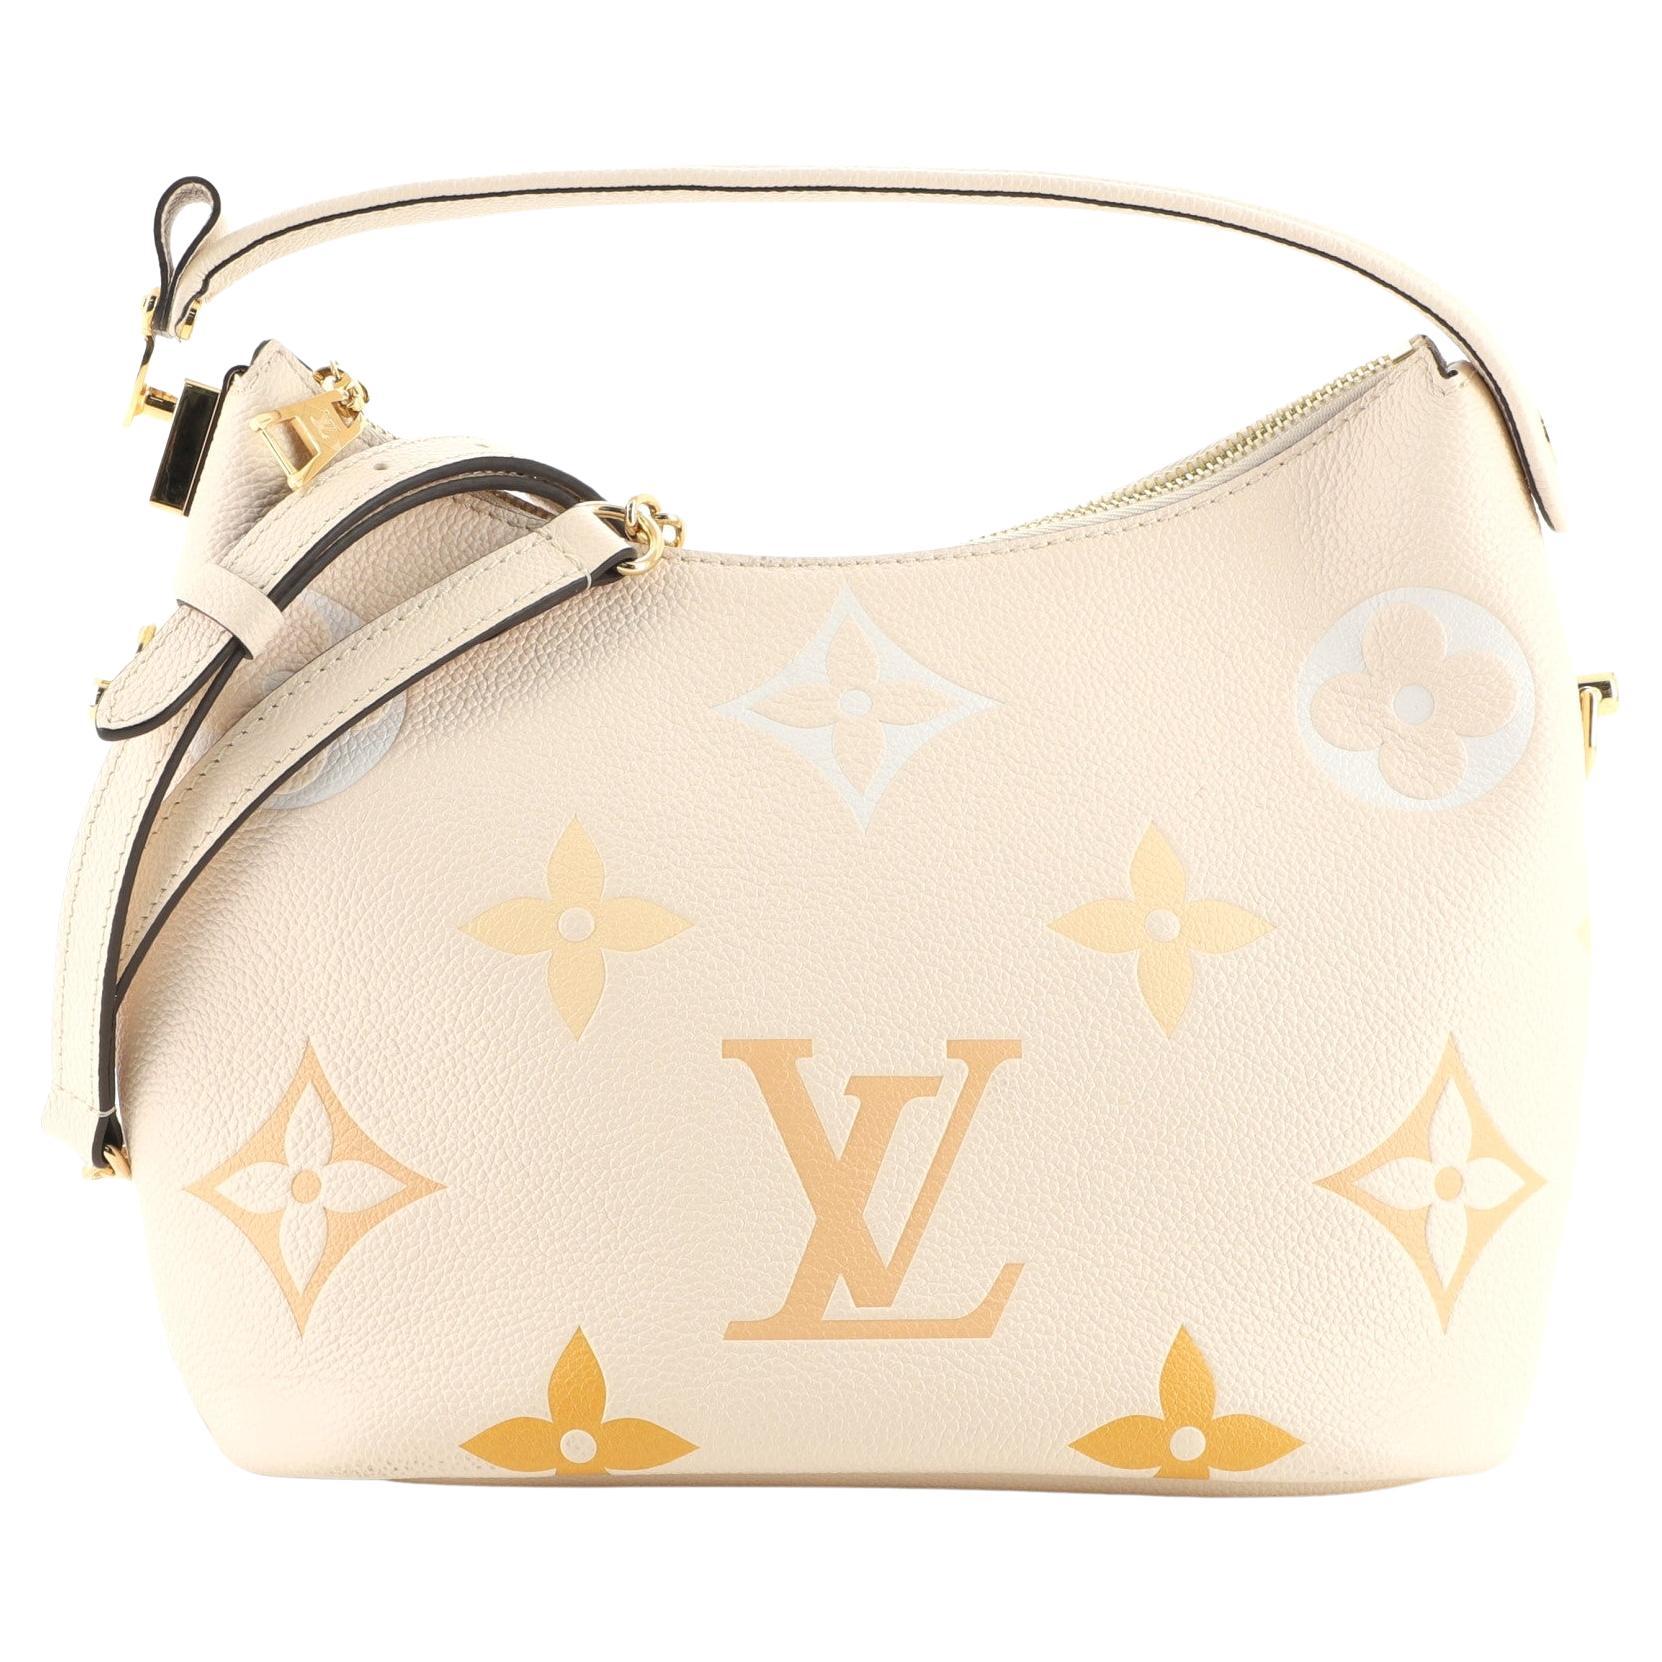 Louis Vuitton Marshmallow Bag - 2 For Sale on 1stDibs  lv marshmallow bag  price, louis vuitton marshmallow pink, marshmallow lv